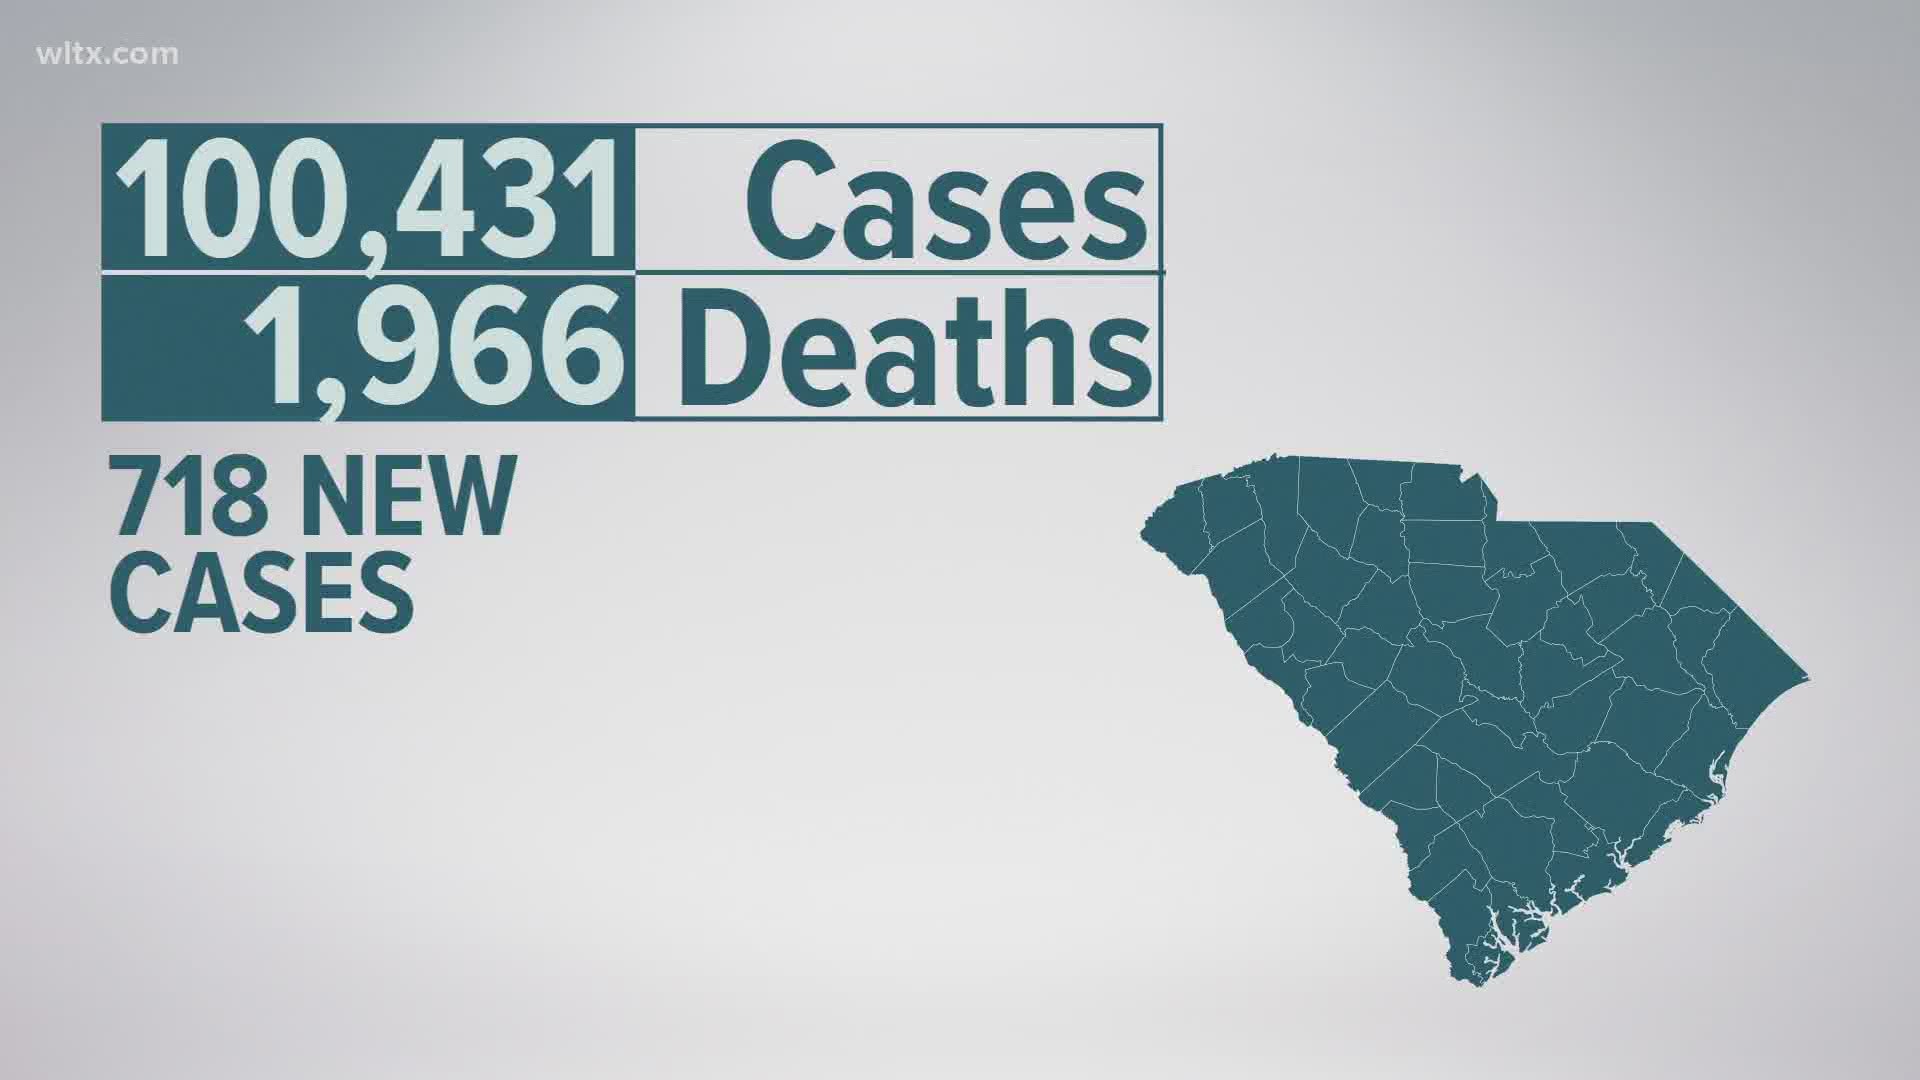 This brings the total number of confirmed cases to 100,431, probable cases to 728, confirmed deaths to 1,966, and 83 probable deaths.